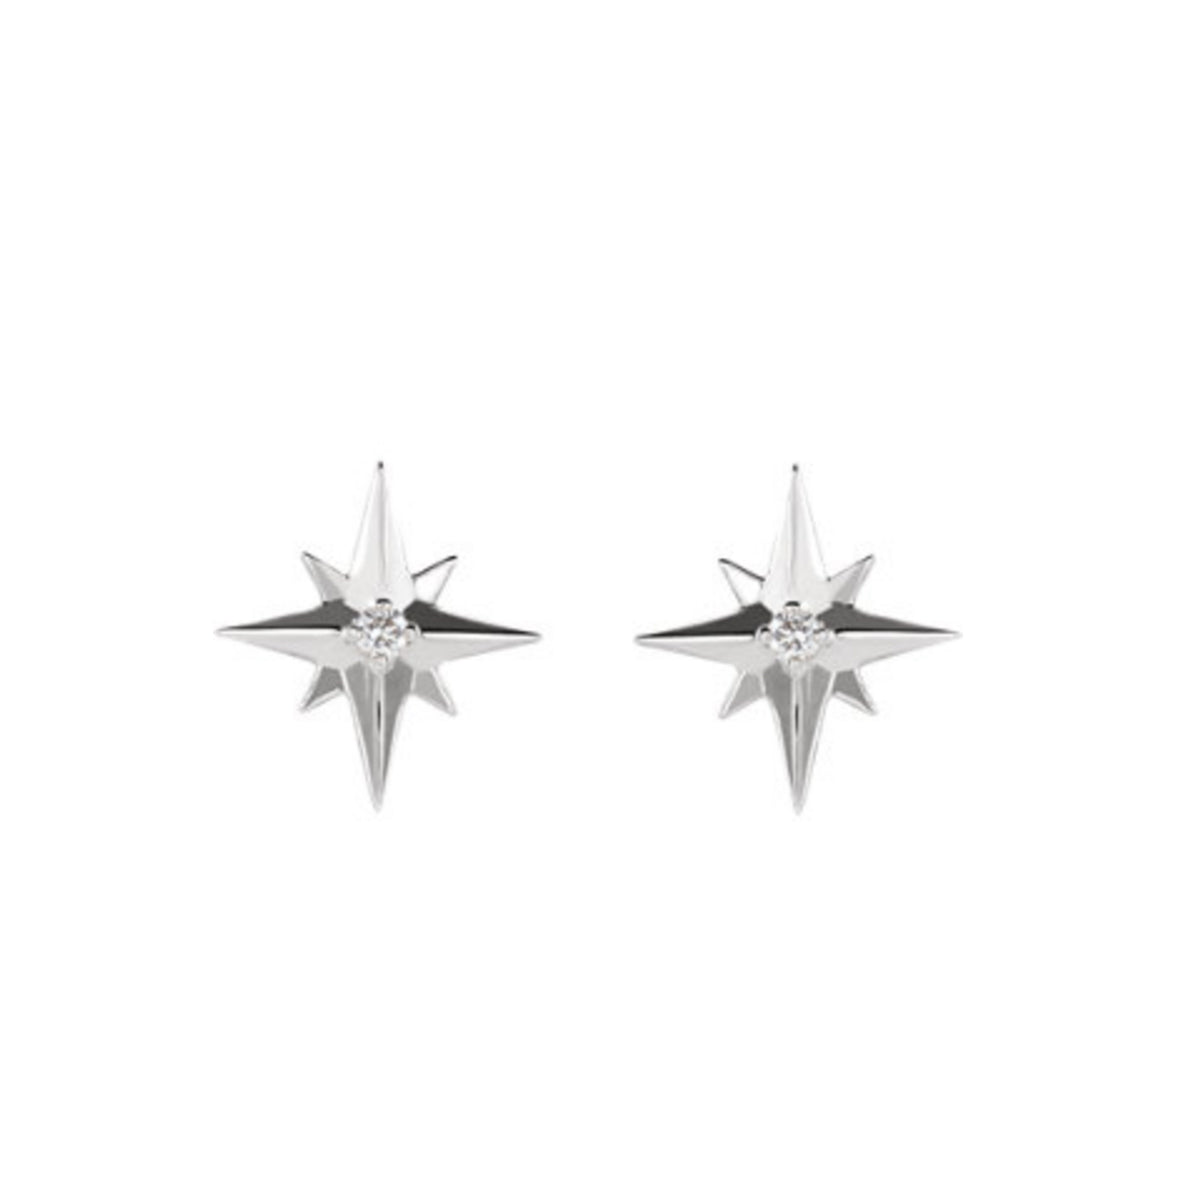 Diamond Starburst Stud Earrings in Gold, Platinum or Sterling Silver - Talisman Collection Fine Jewelers